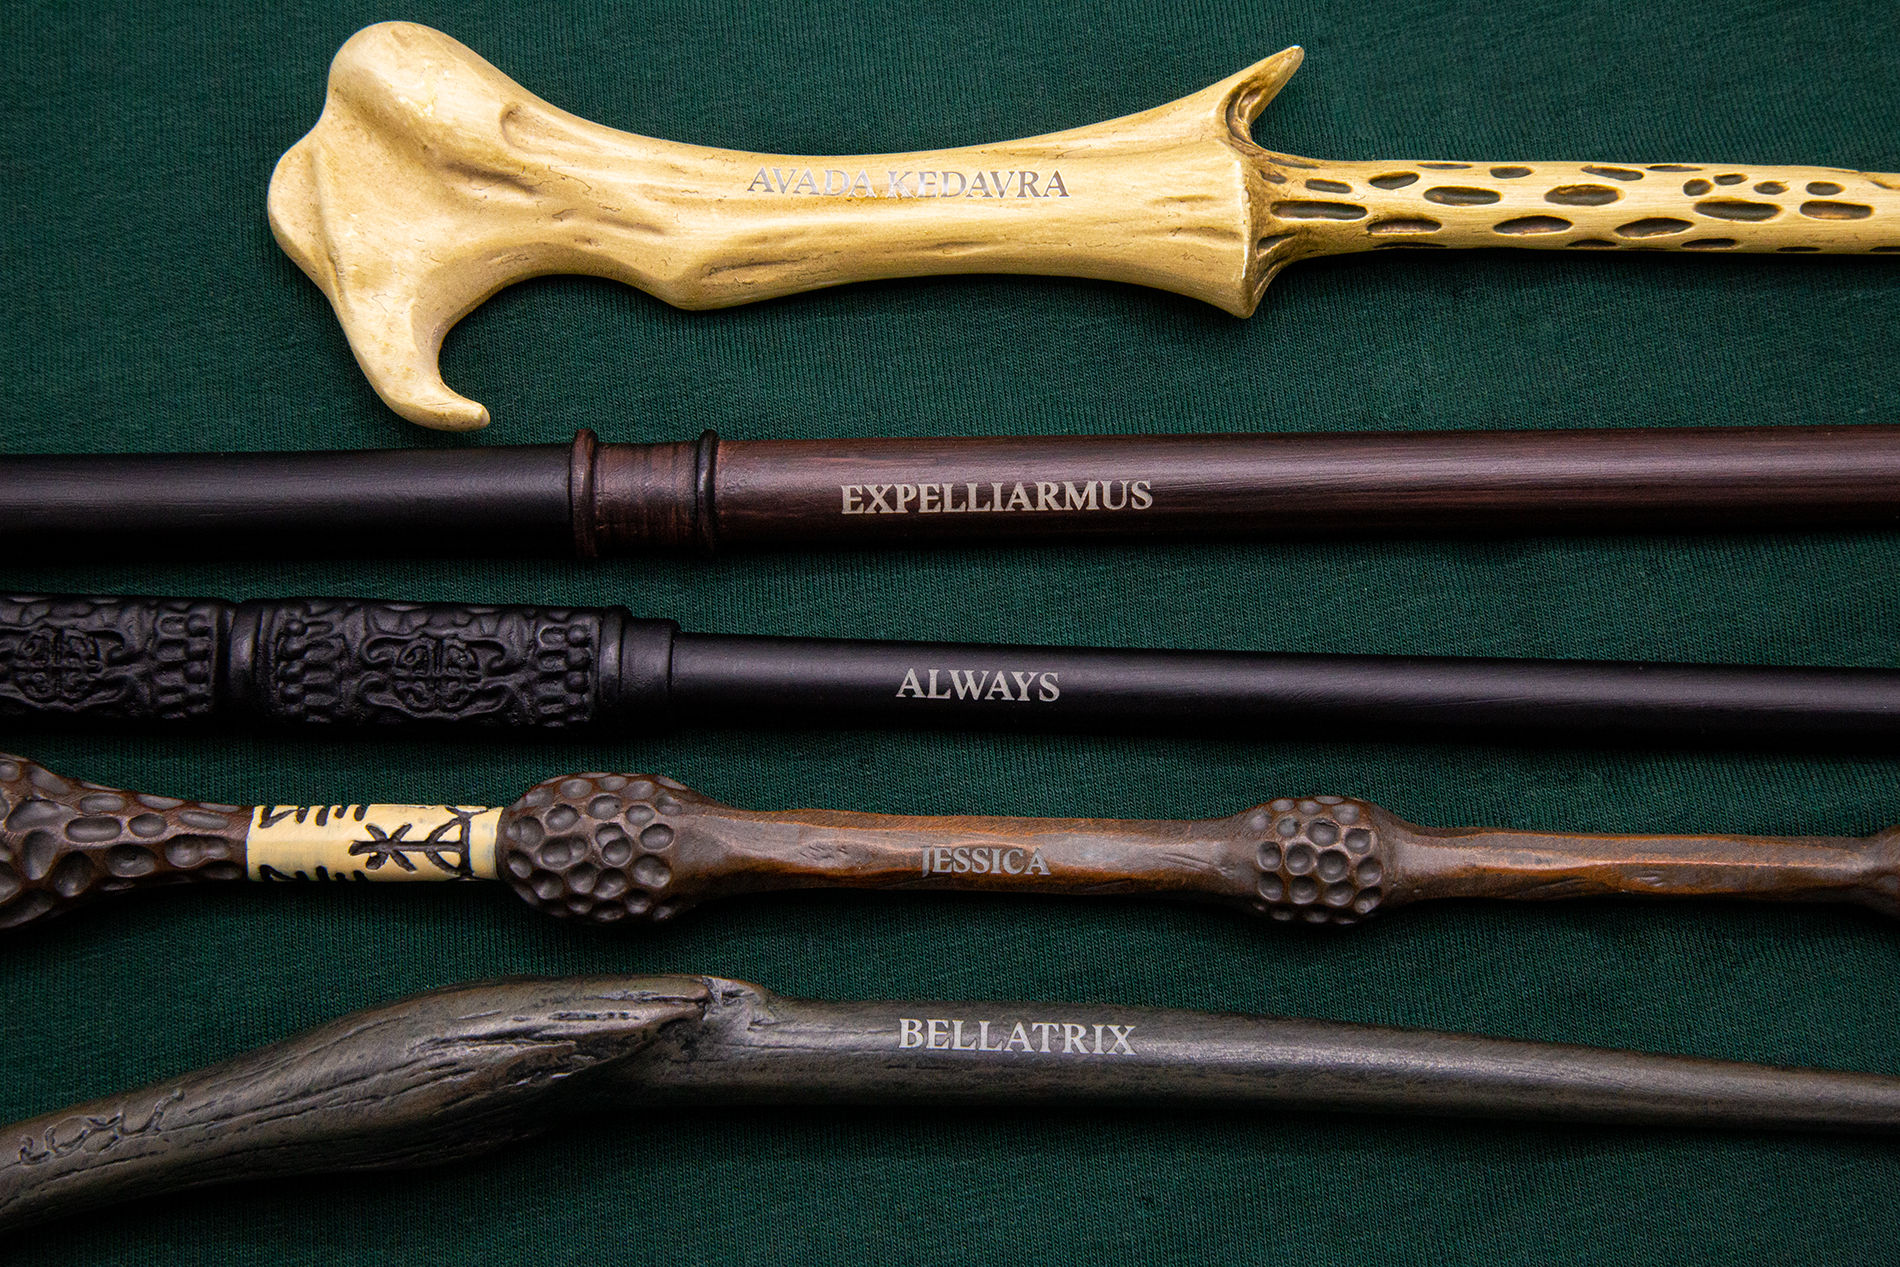 Personalise your own Harry Potter wand